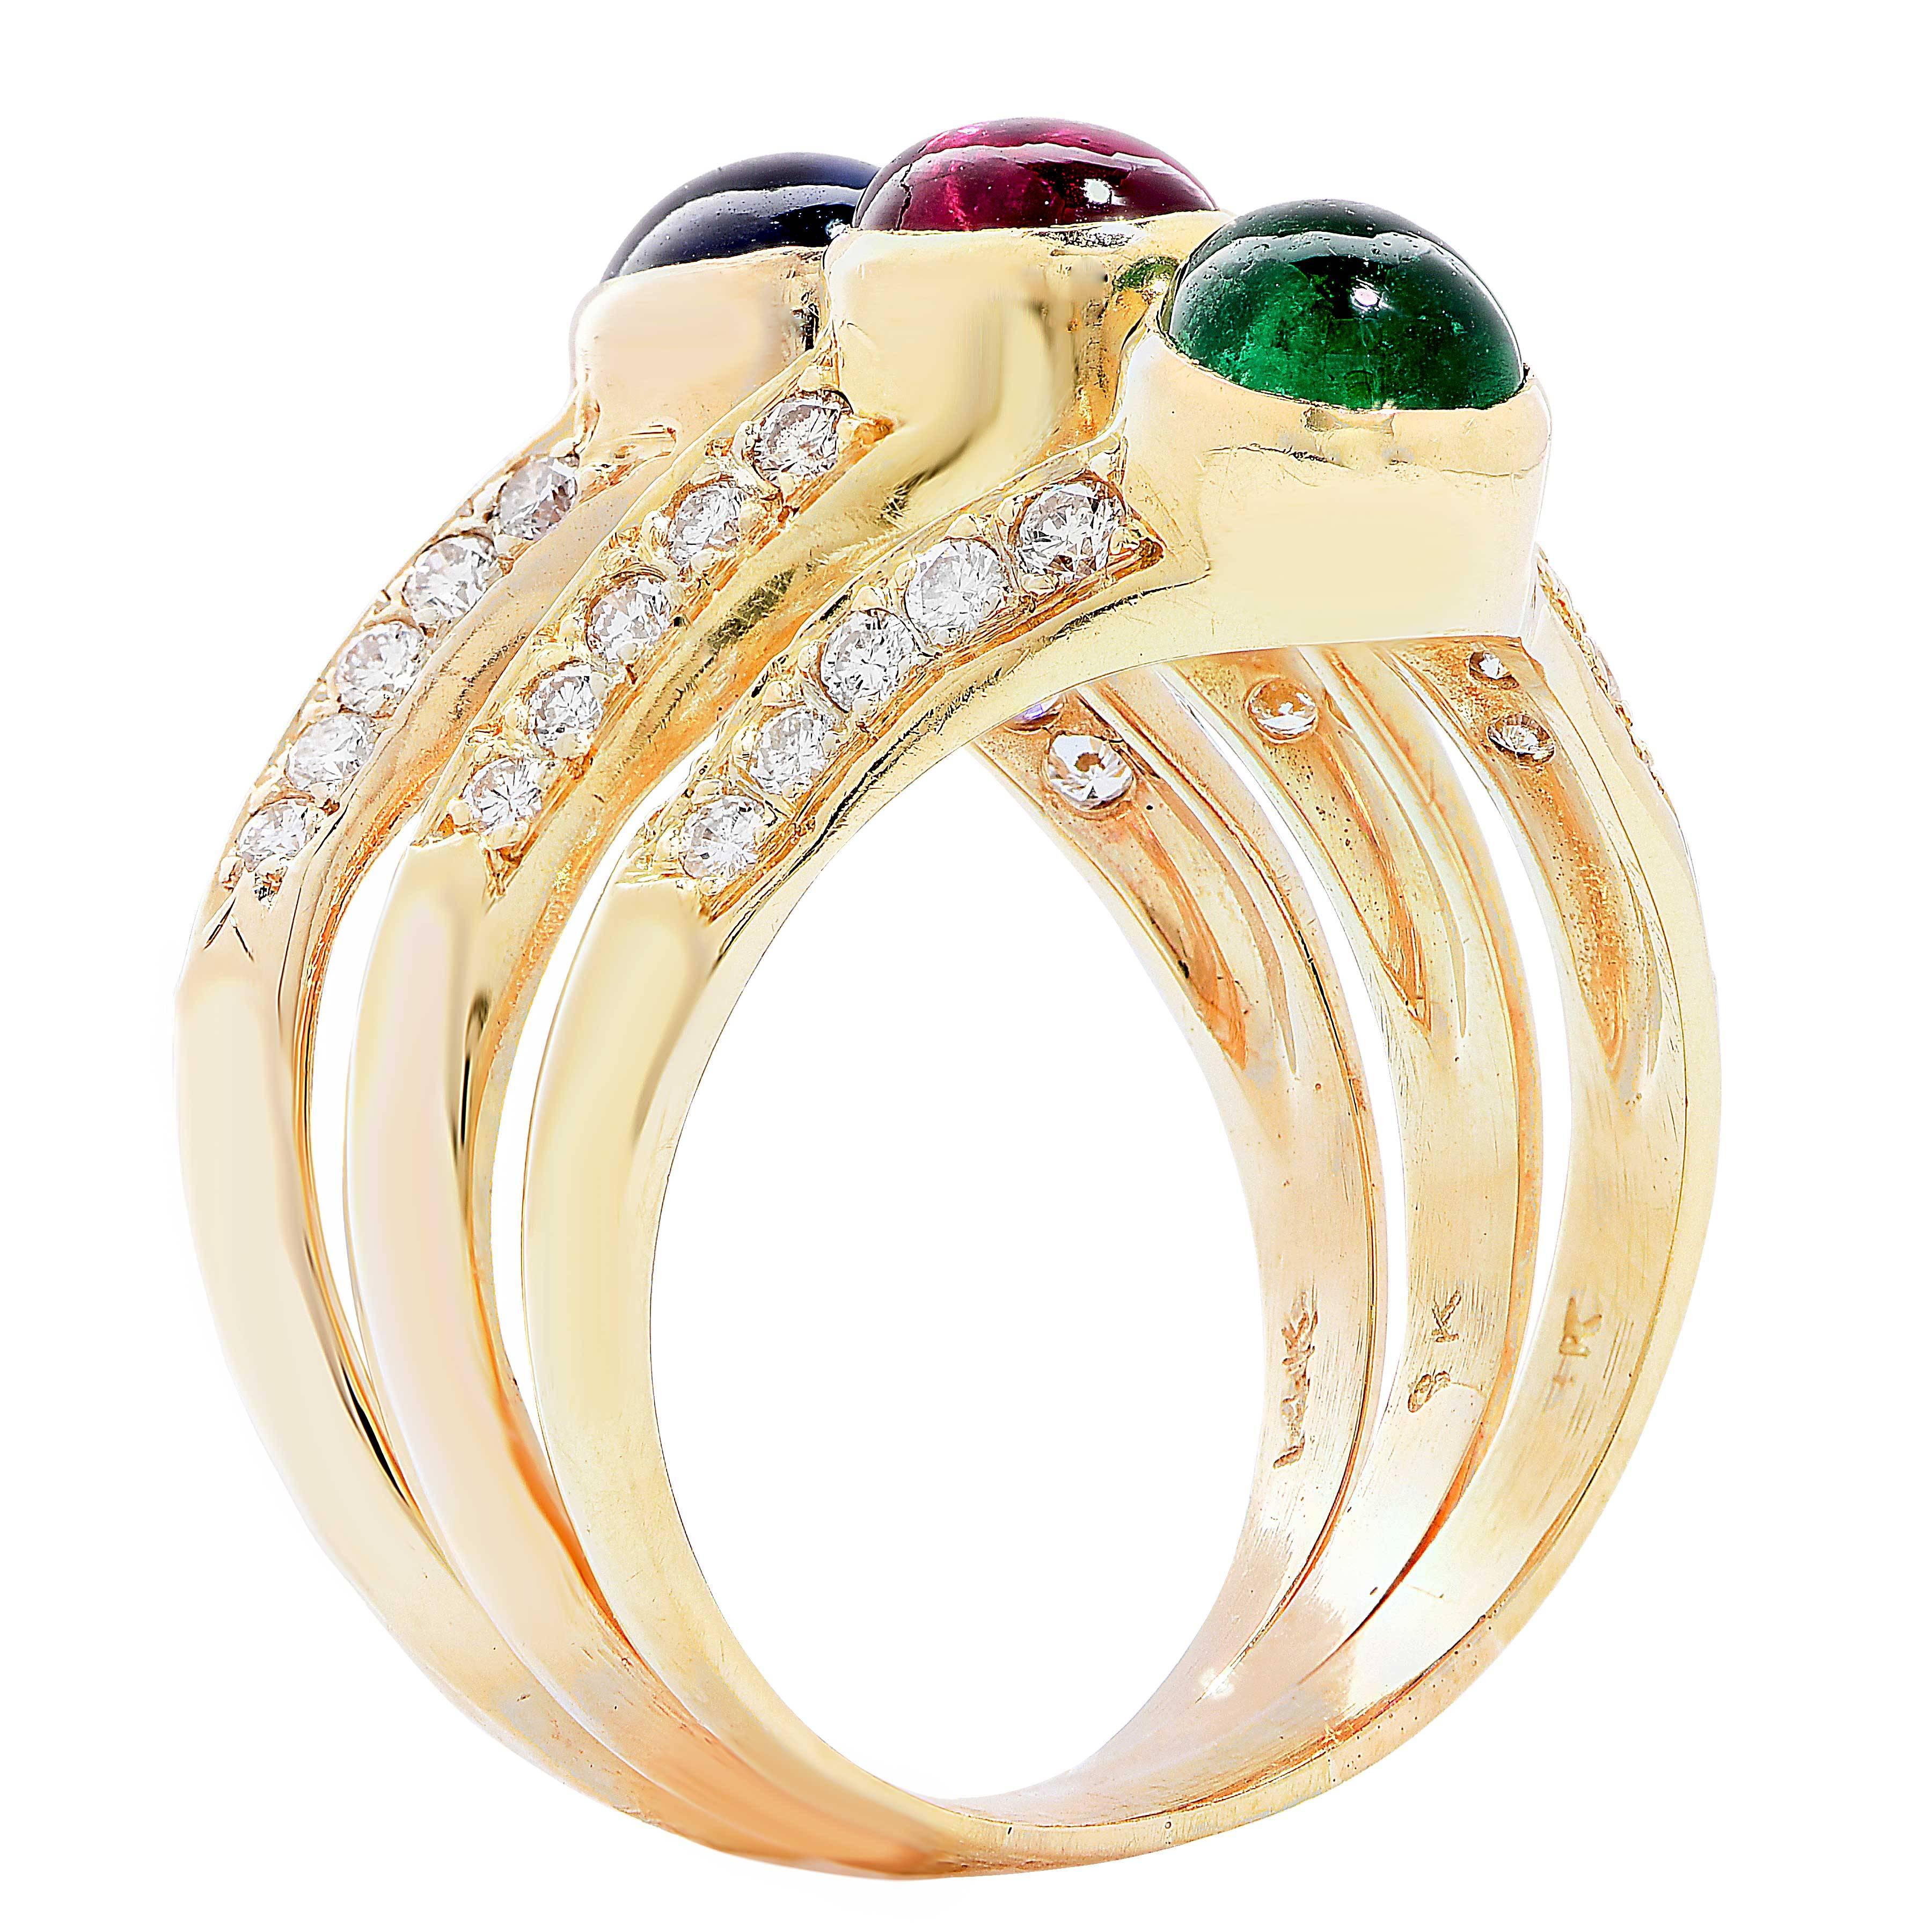 Triple Row Ruby Emerald Sapphire Diamond 18 Karat Yellow Gold Ring In Excellent Condition For Sale In Bay Harbor Islands, FL